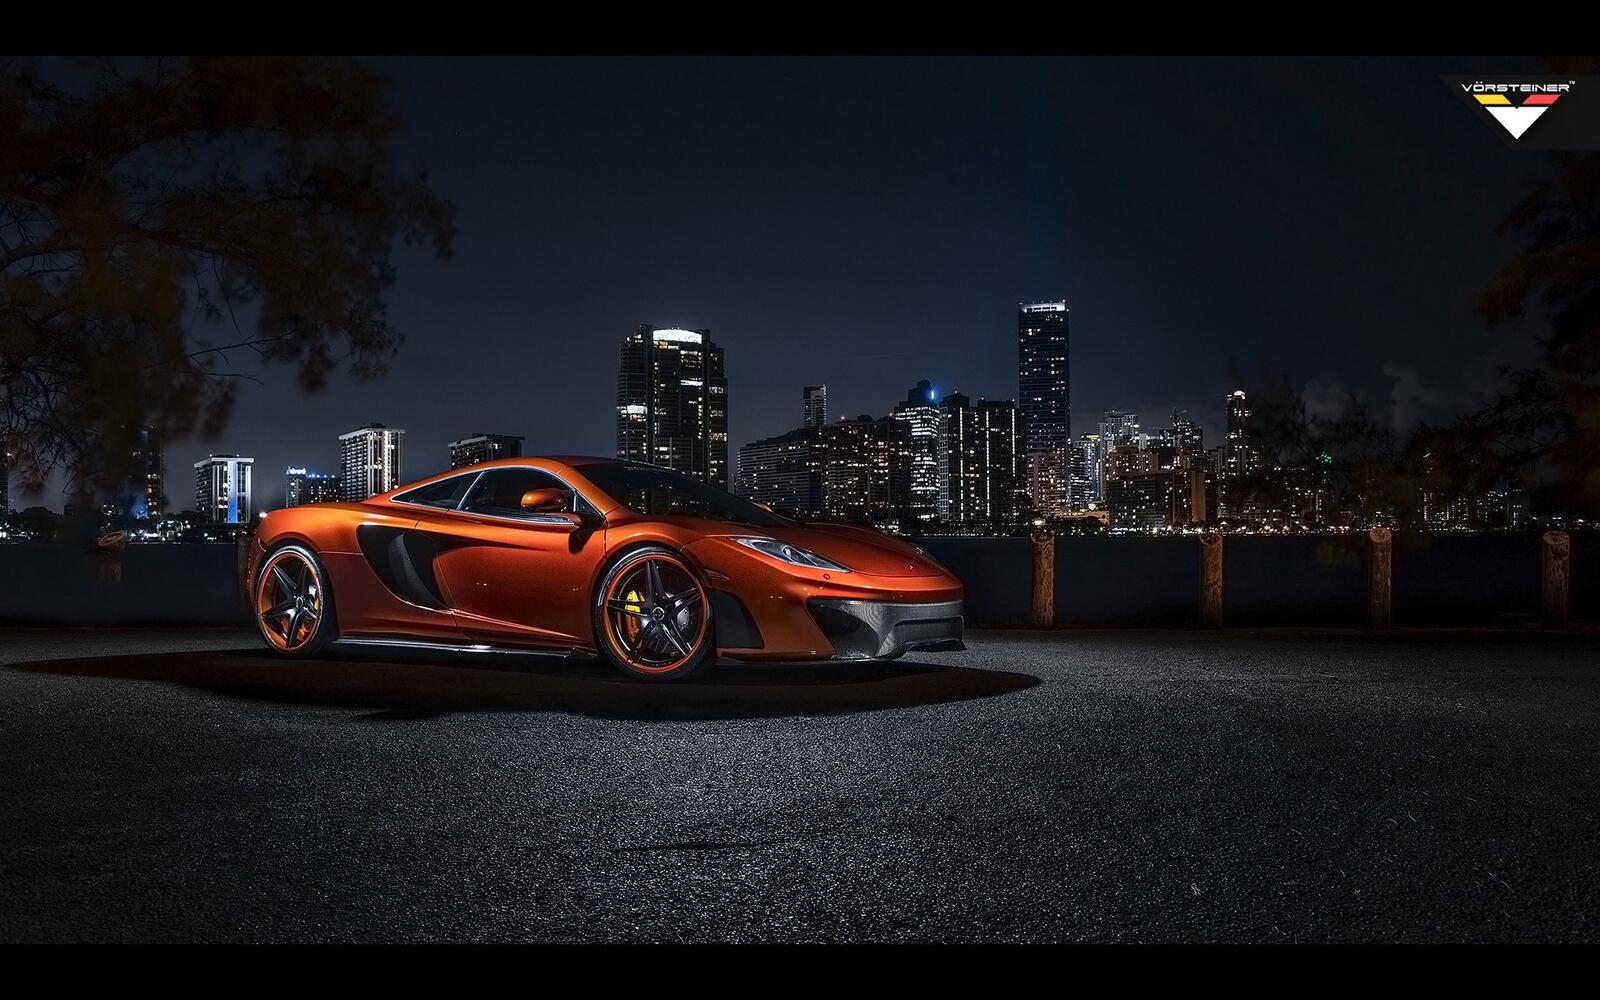 Free photo The McLaren MP4 12C against the backdrop of the city at night.